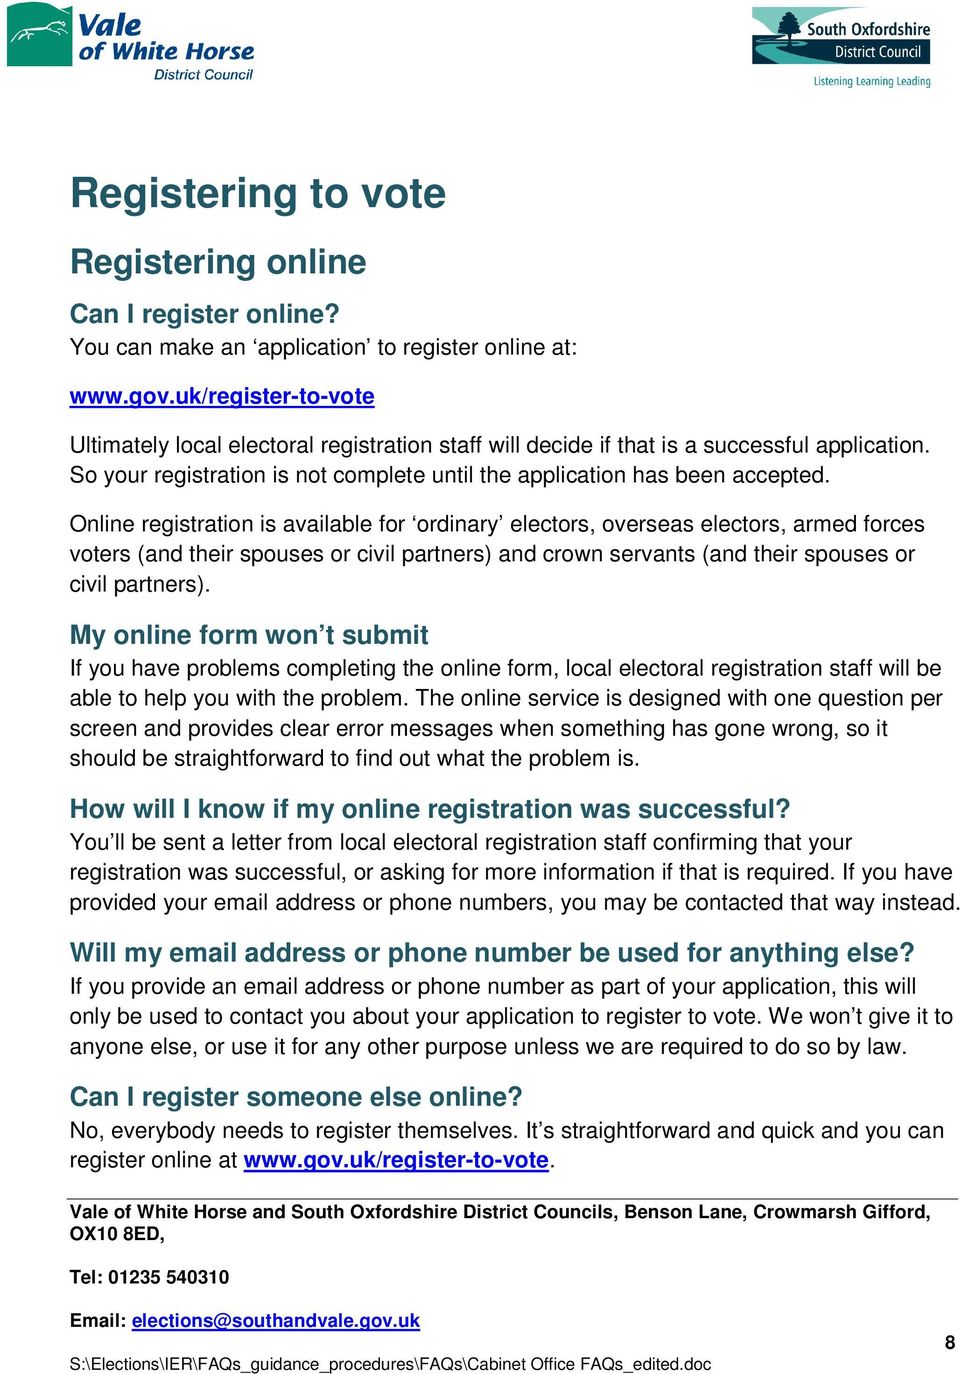 Online registration is available for ordinary electors, overseas electors, armed forces voters (and their spouses or civil partners) and crown servants (and their spouses or civil partners).